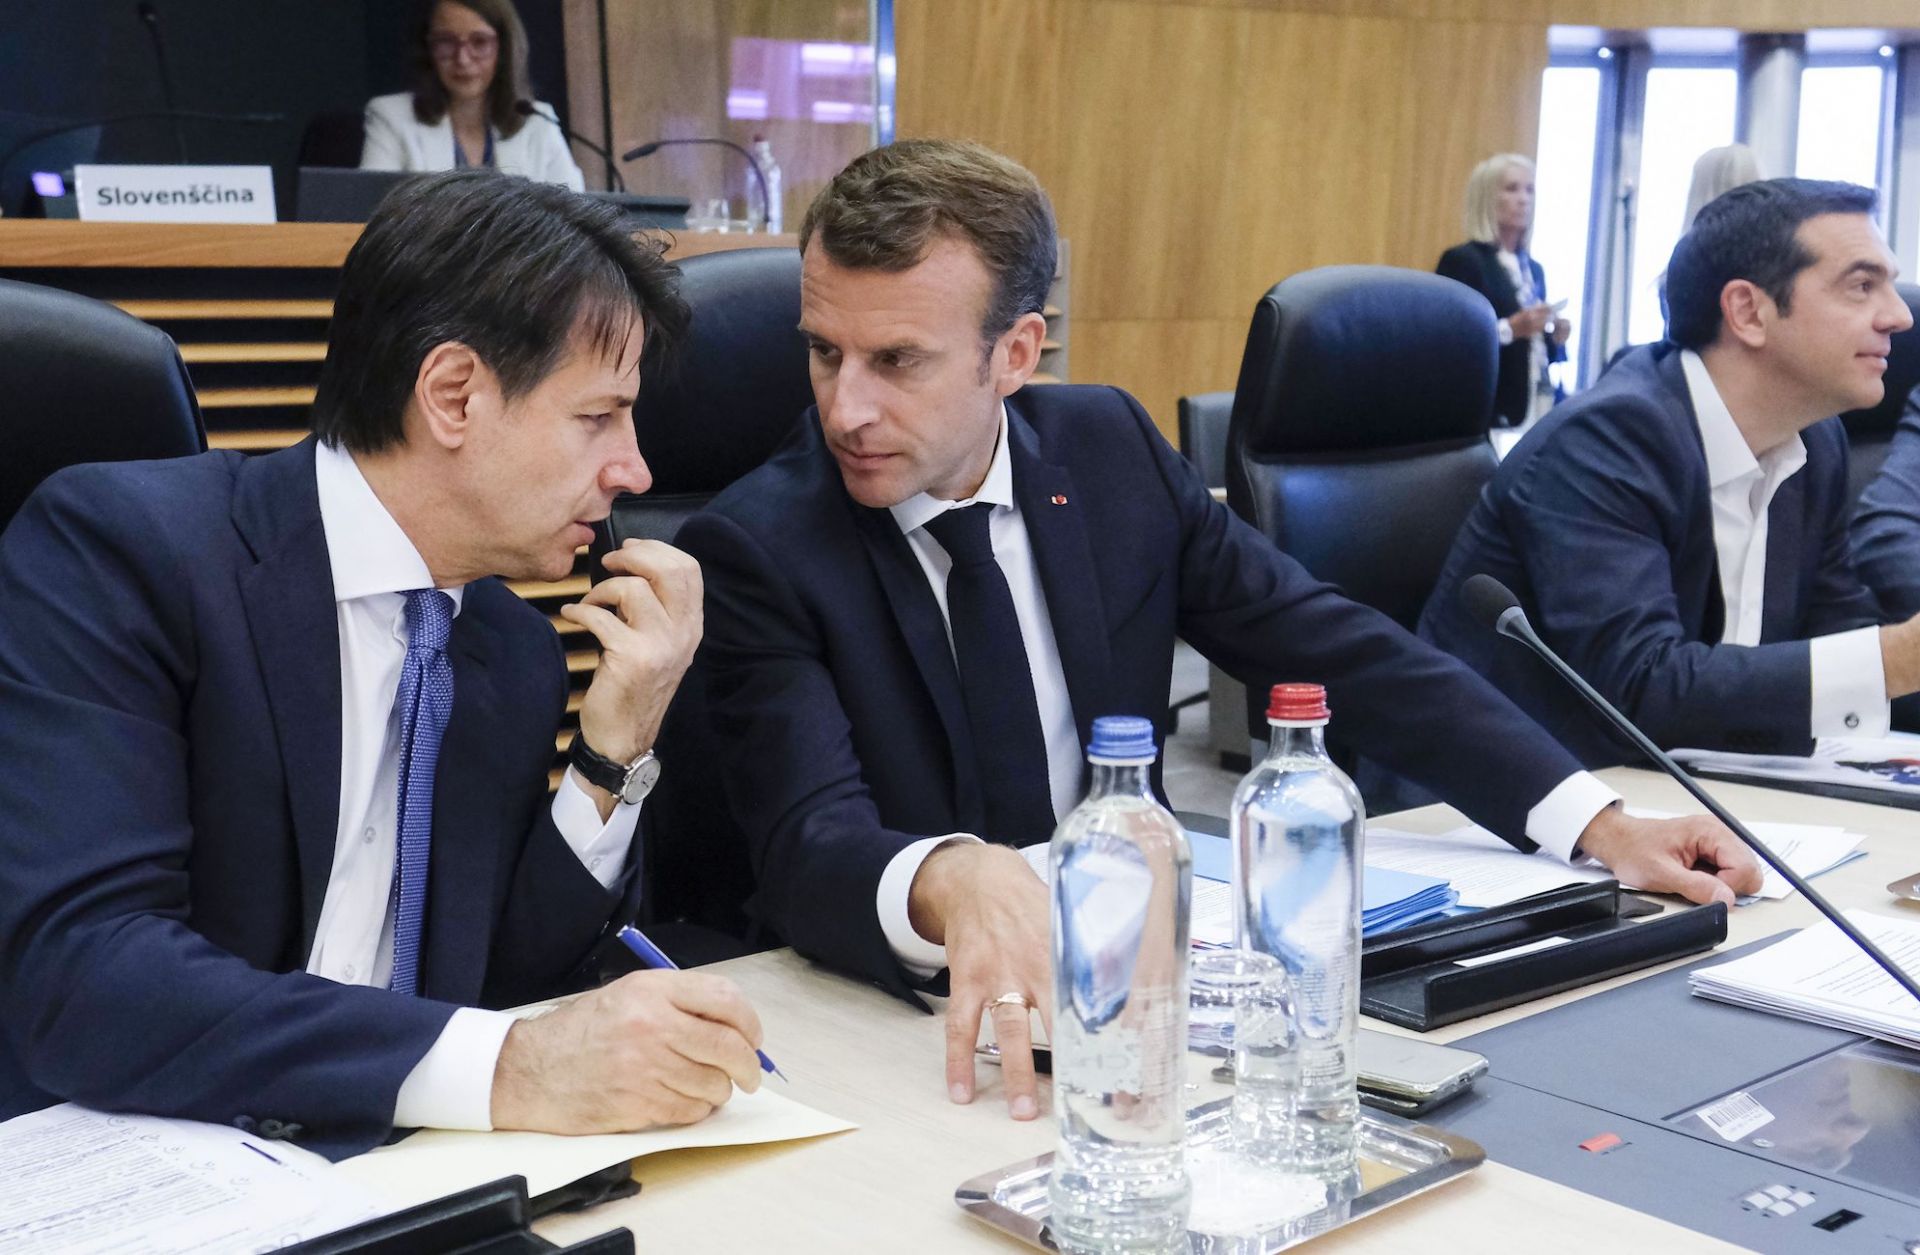 Italian Prime Minister Giuseppe Conte, left, speaks with French President Emmanuel Macron during a summit on migration issues at EU headquarters in Brussels on June 24.